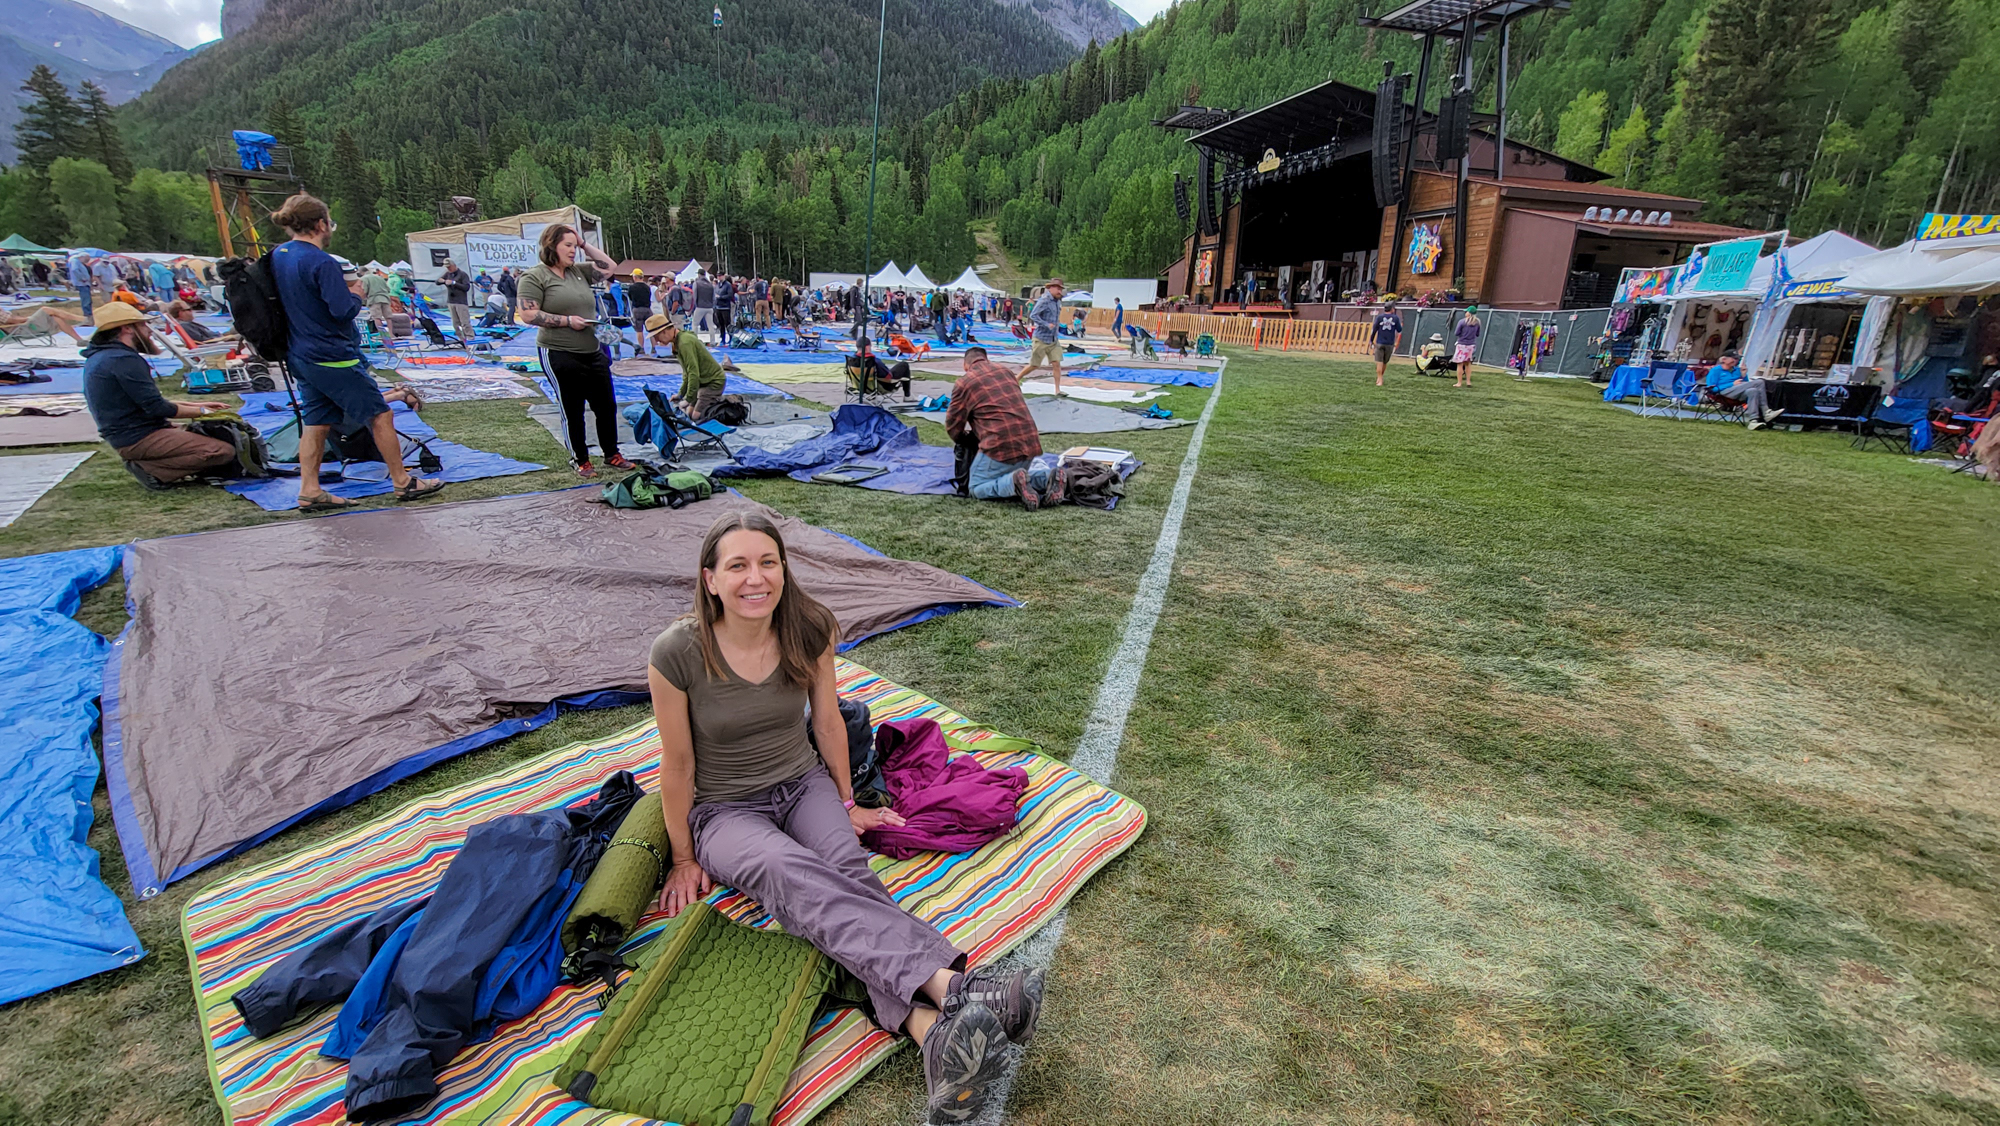 Rope Drop Claim at bluegrass festival in Telluride